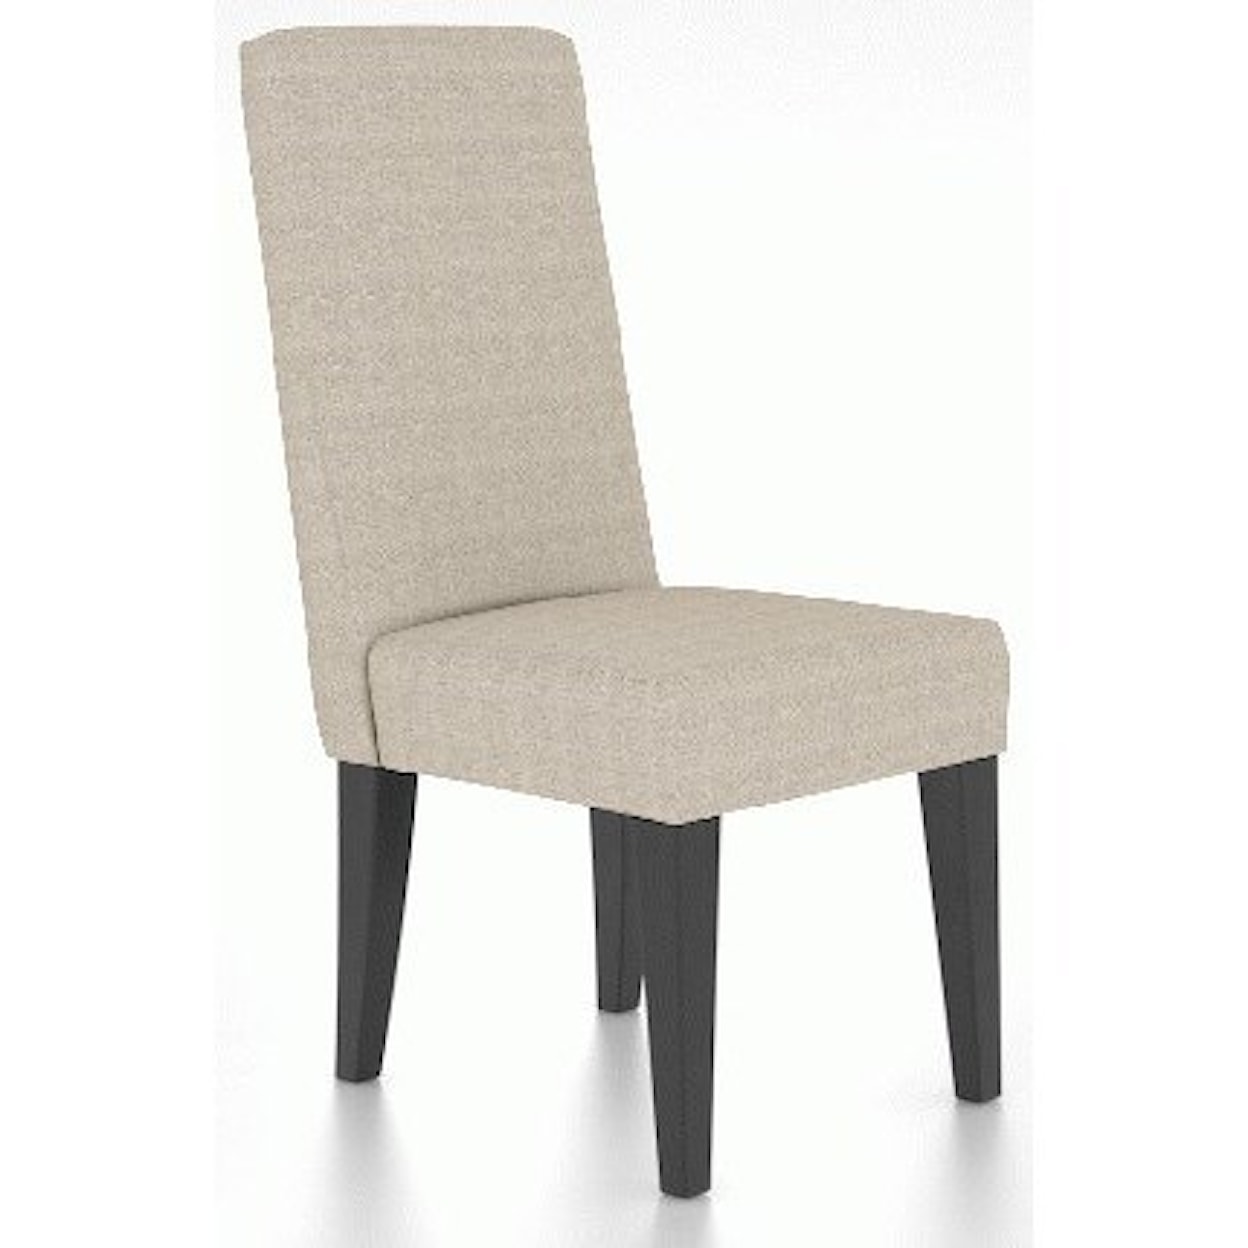 Canadel Gourmet Customizable Dining Side Chair